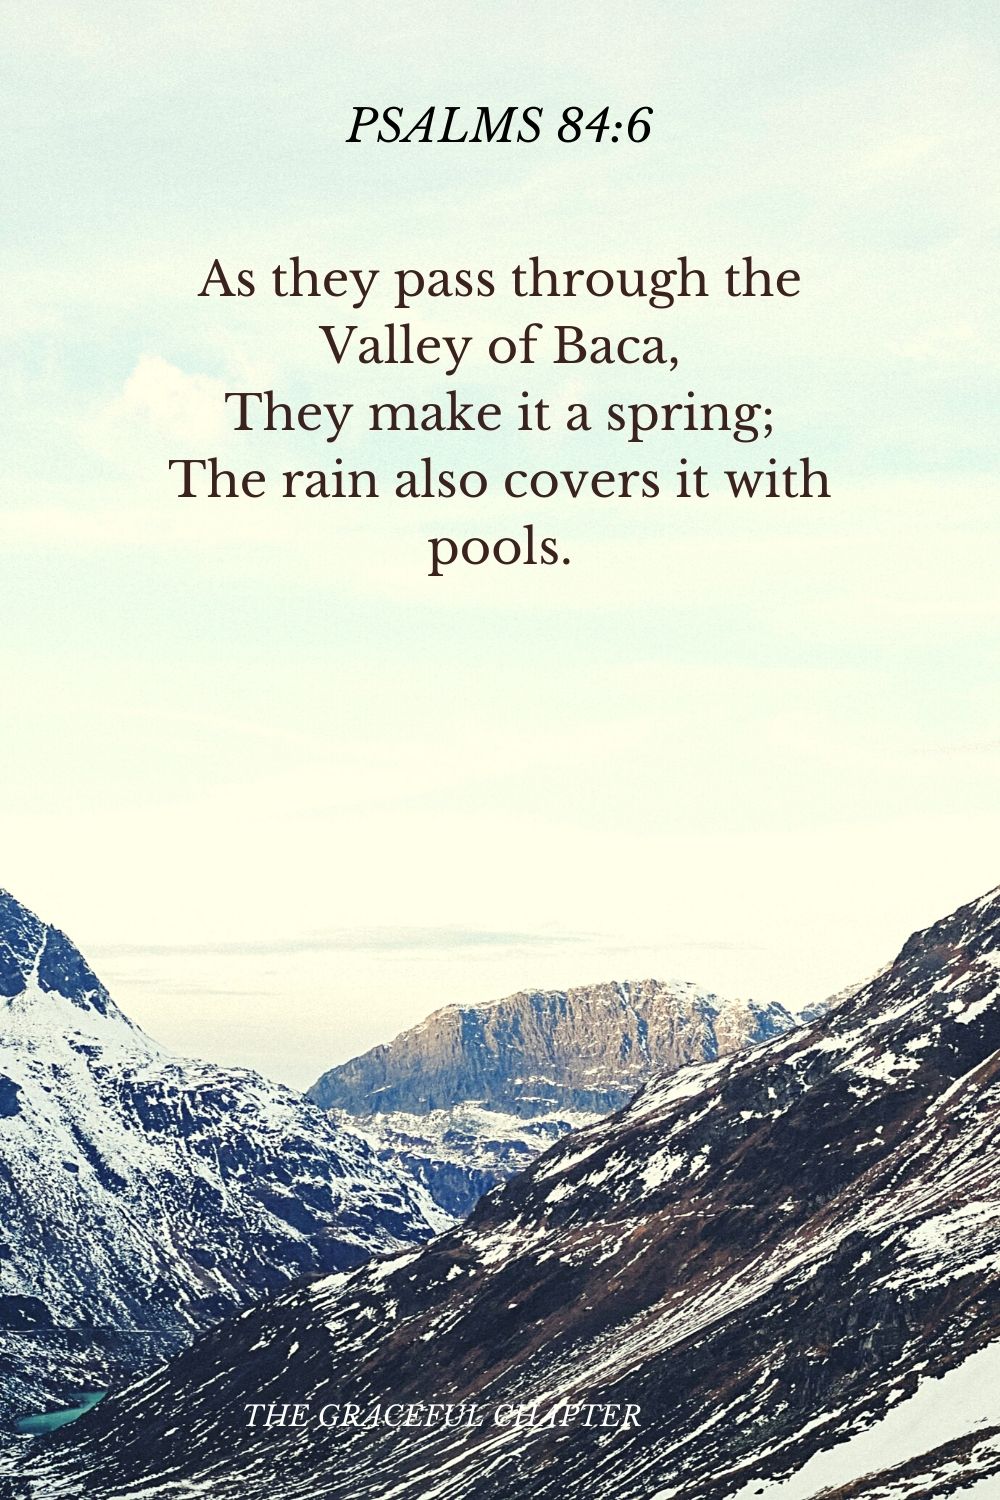 As they pass through the Valley of Baca, They make it a spring; The rain also covers it with pools. Psalms 84:6